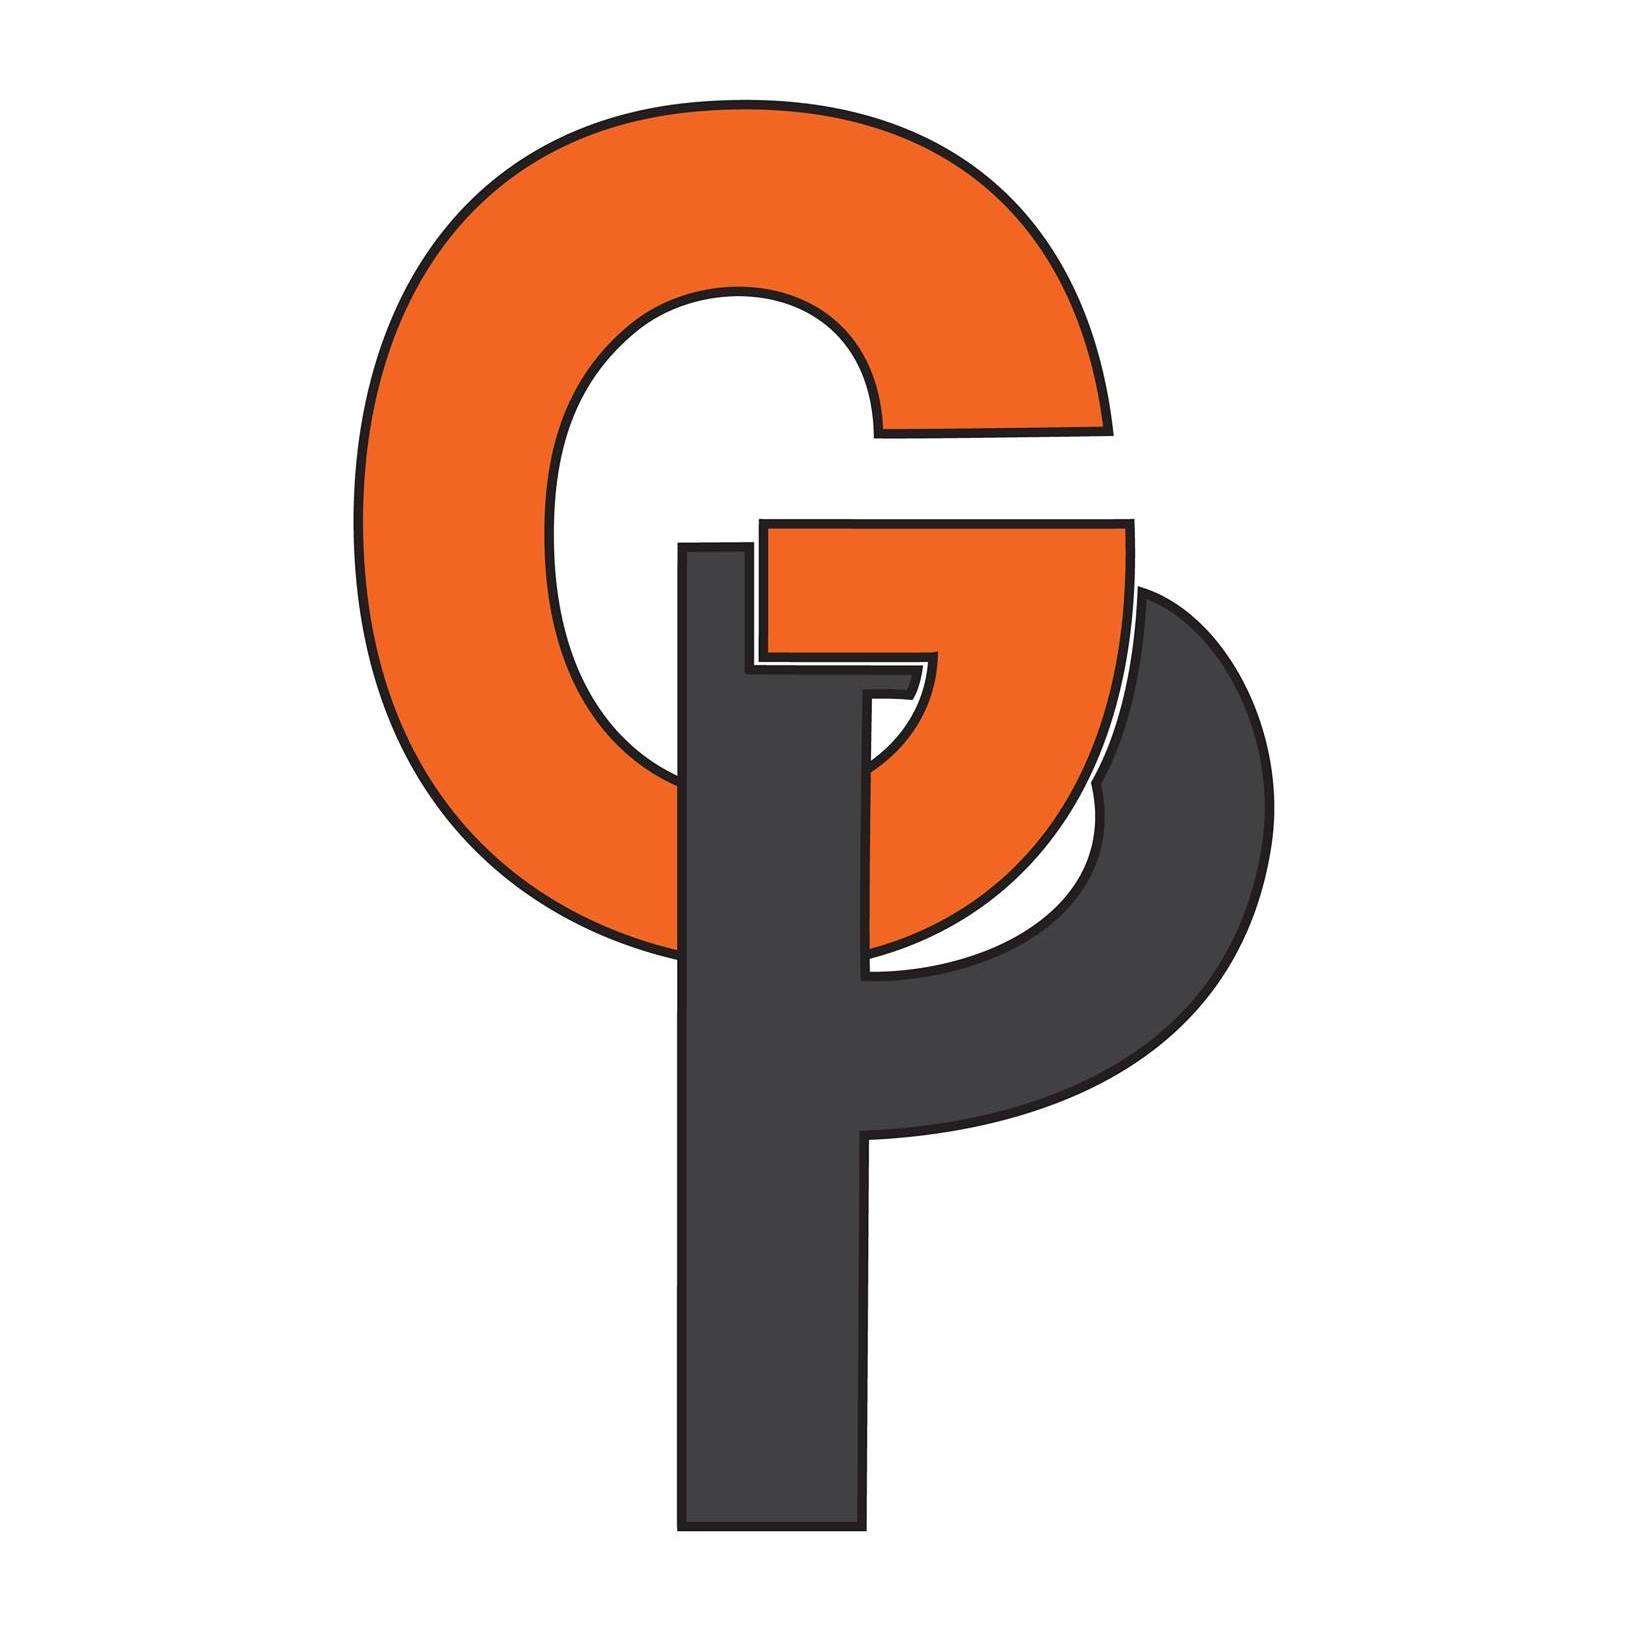 Gp g p letter logo design with swoosh and black Vector Image